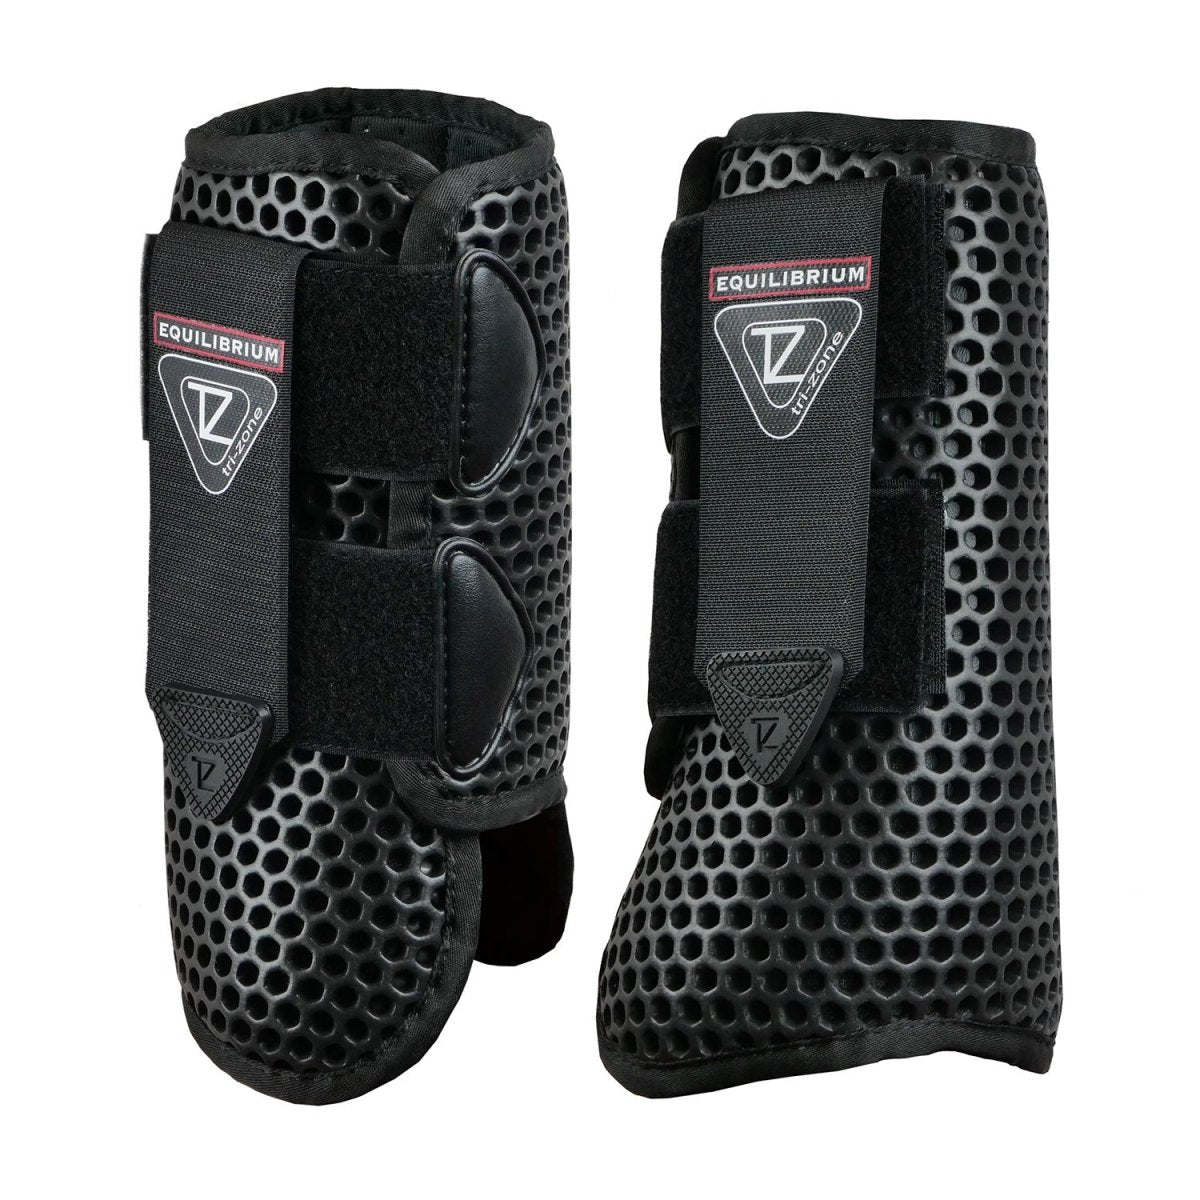 Equilibrium Tri-Zone All Sports Boots - Black - Extra Large